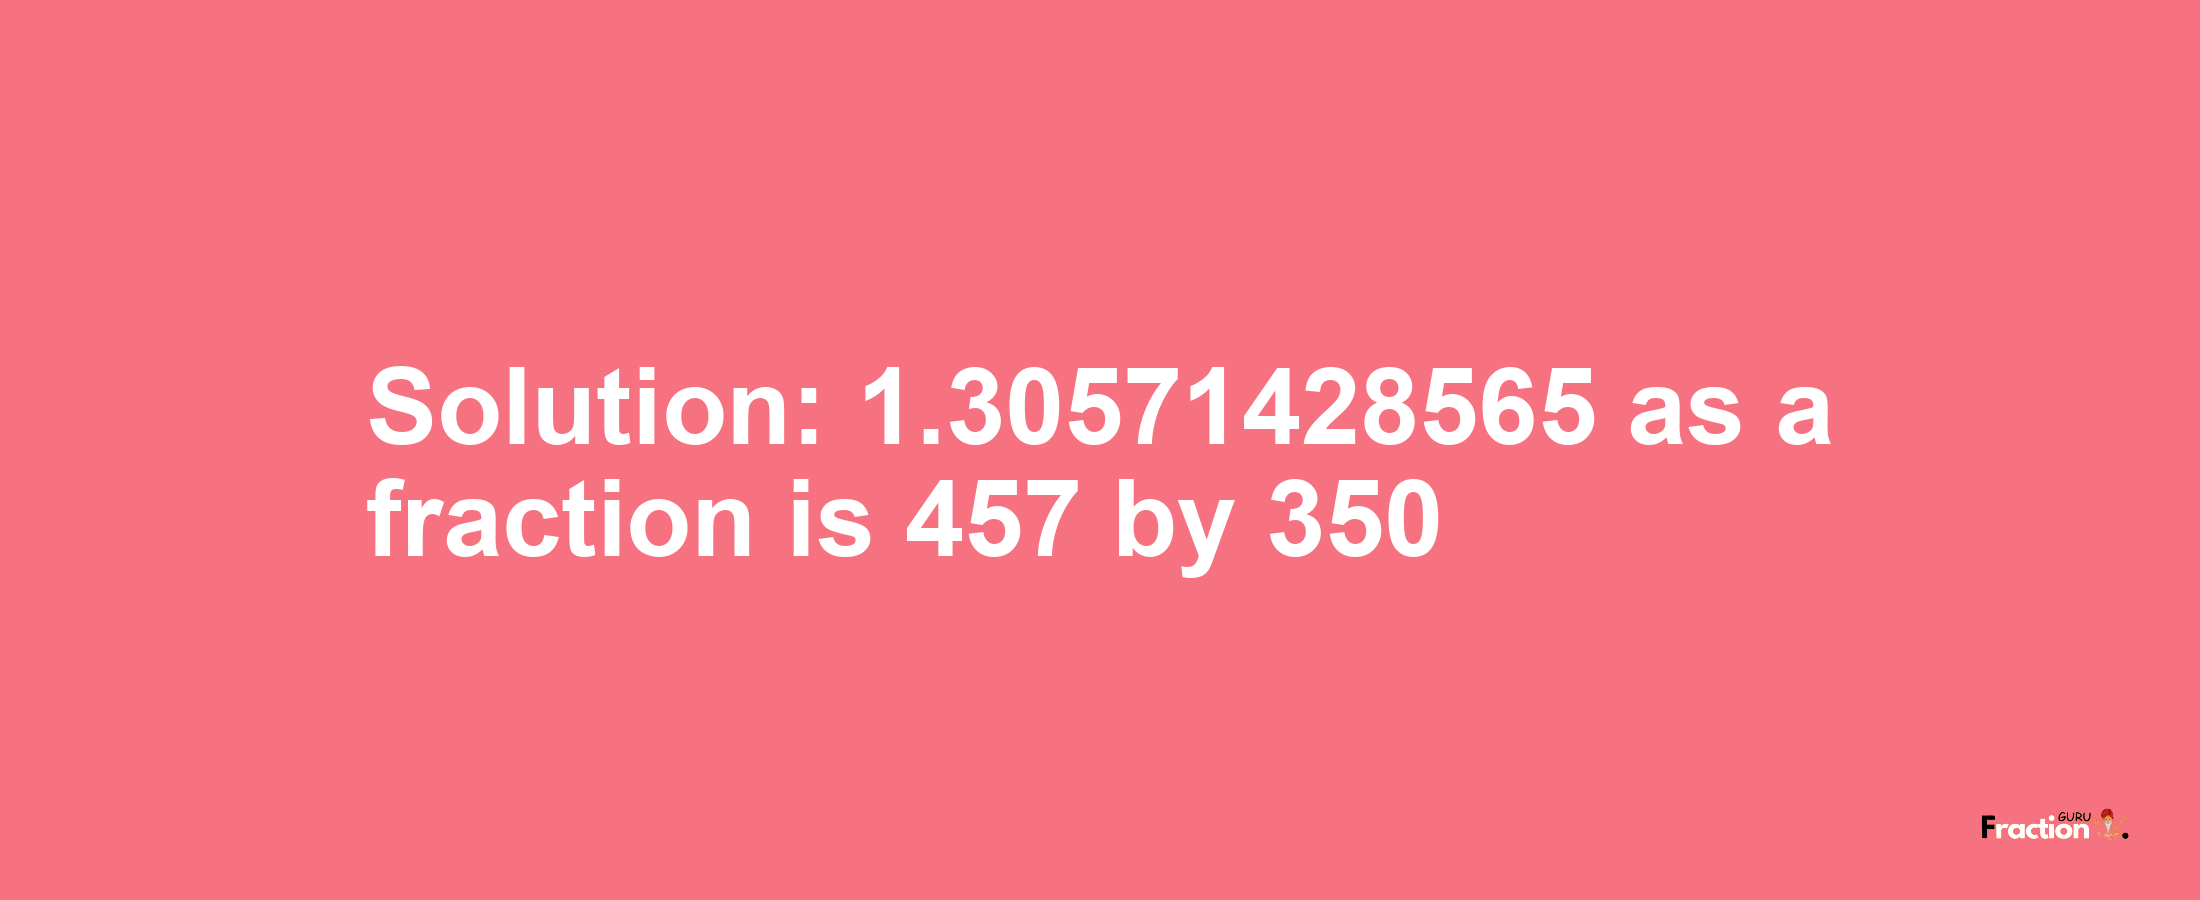 Solution:1.30571428565 as a fraction is 457/350